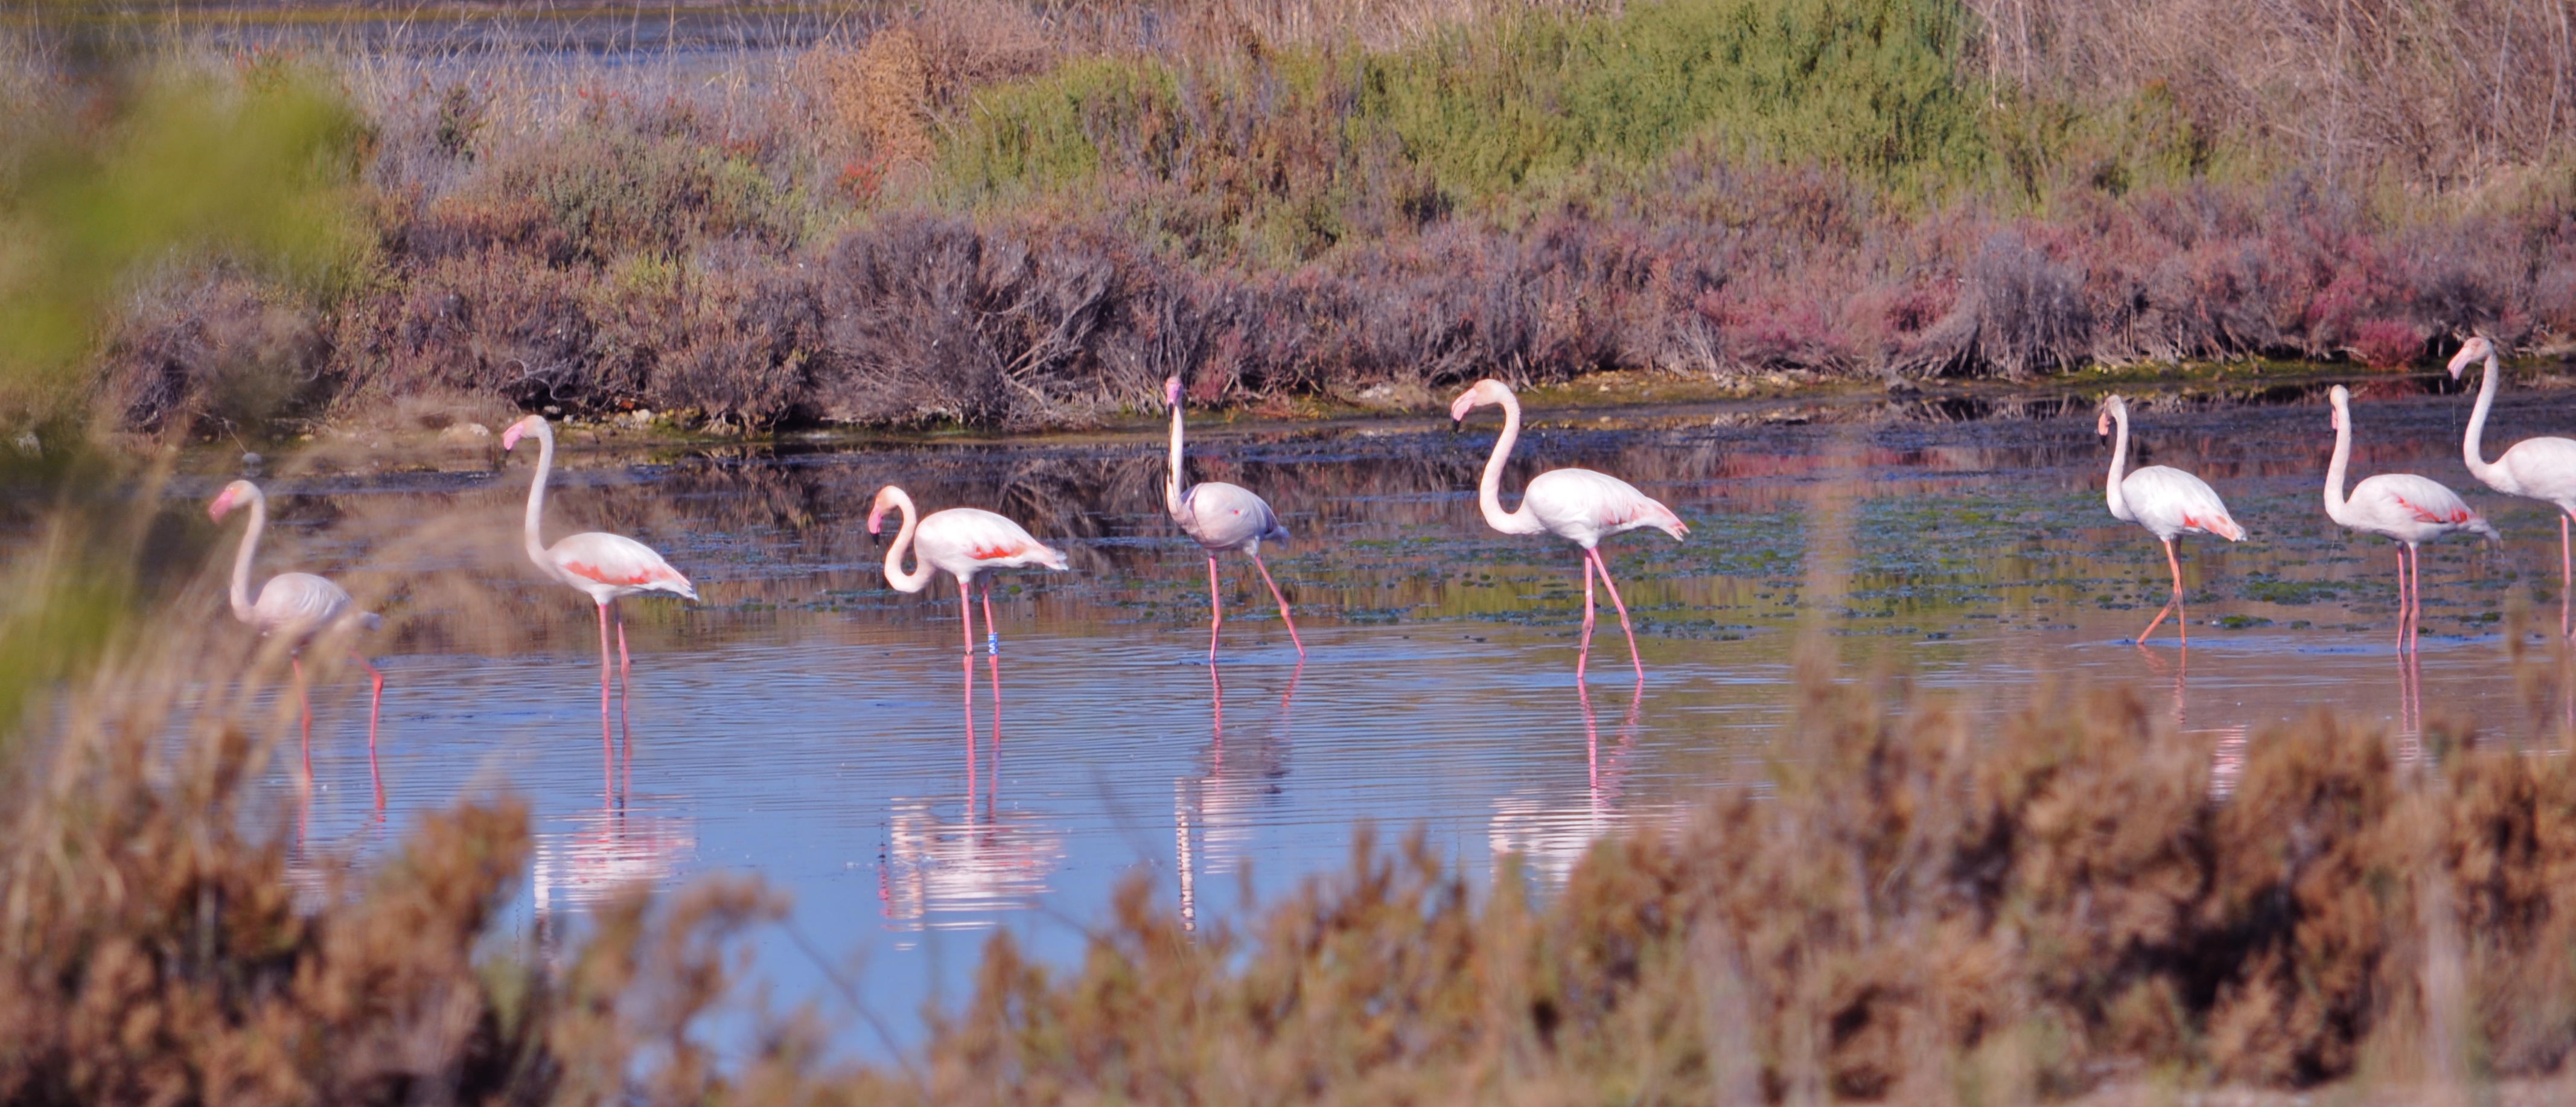 A group of flamingos in a shallow pond surrounded by bushes